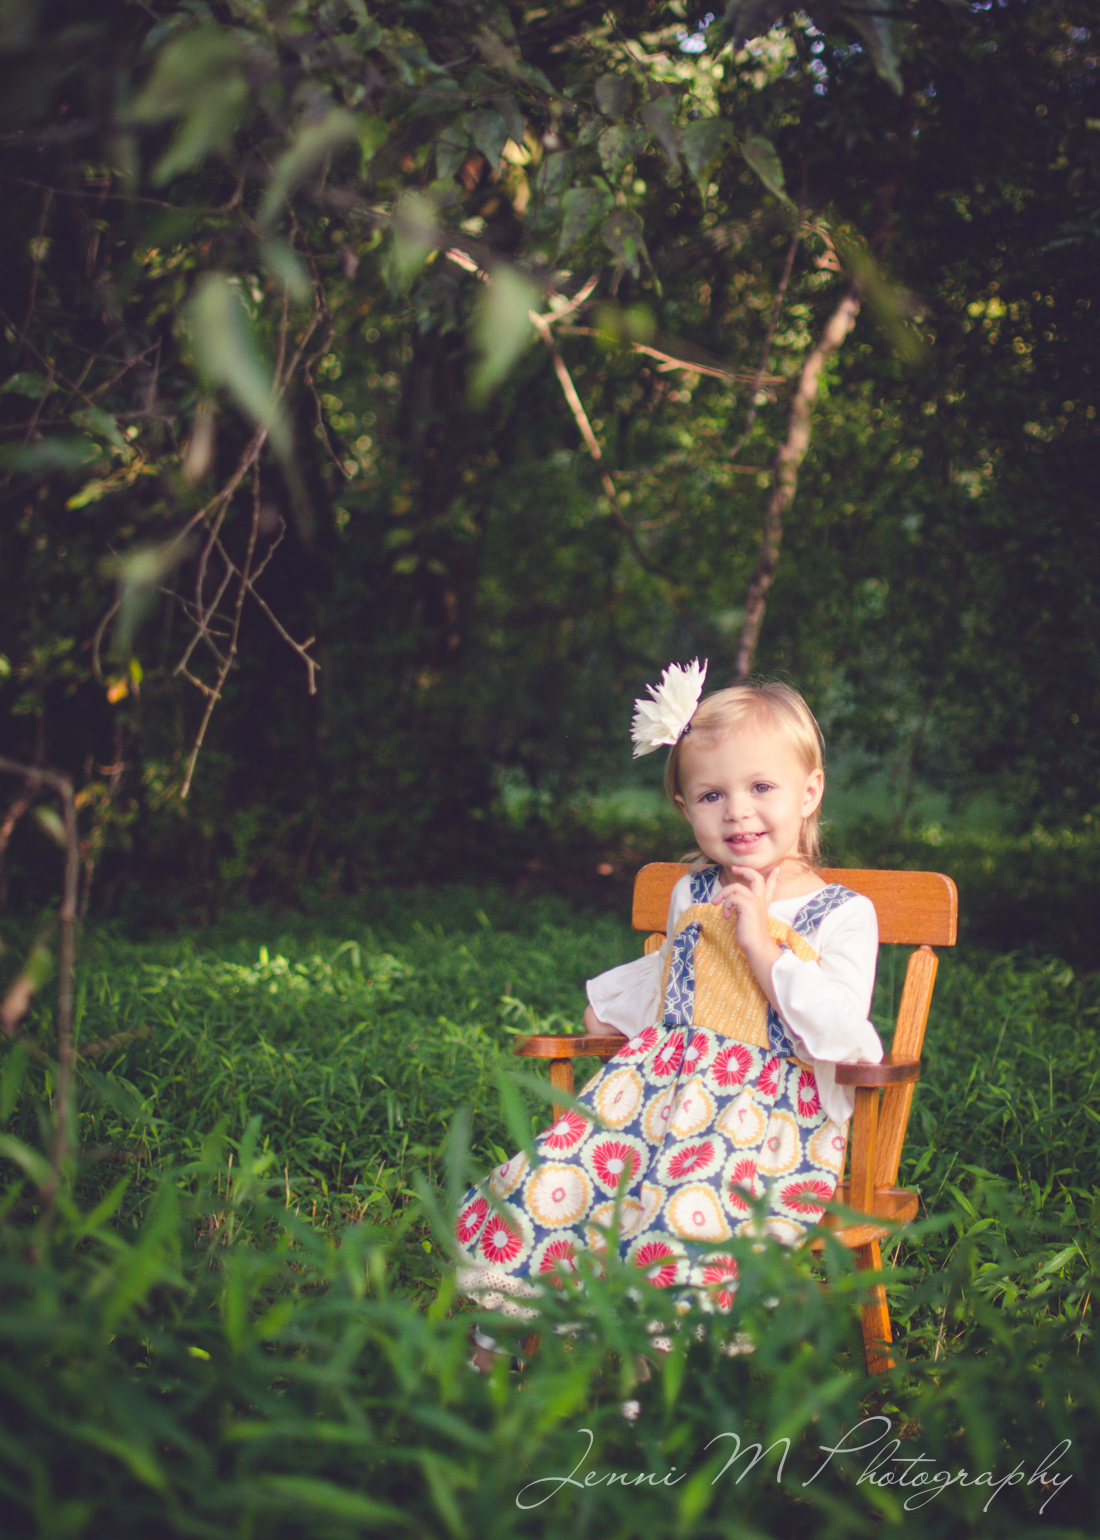 Jenni M Photography 2 year old birthday photography outdoor affordable natural-1